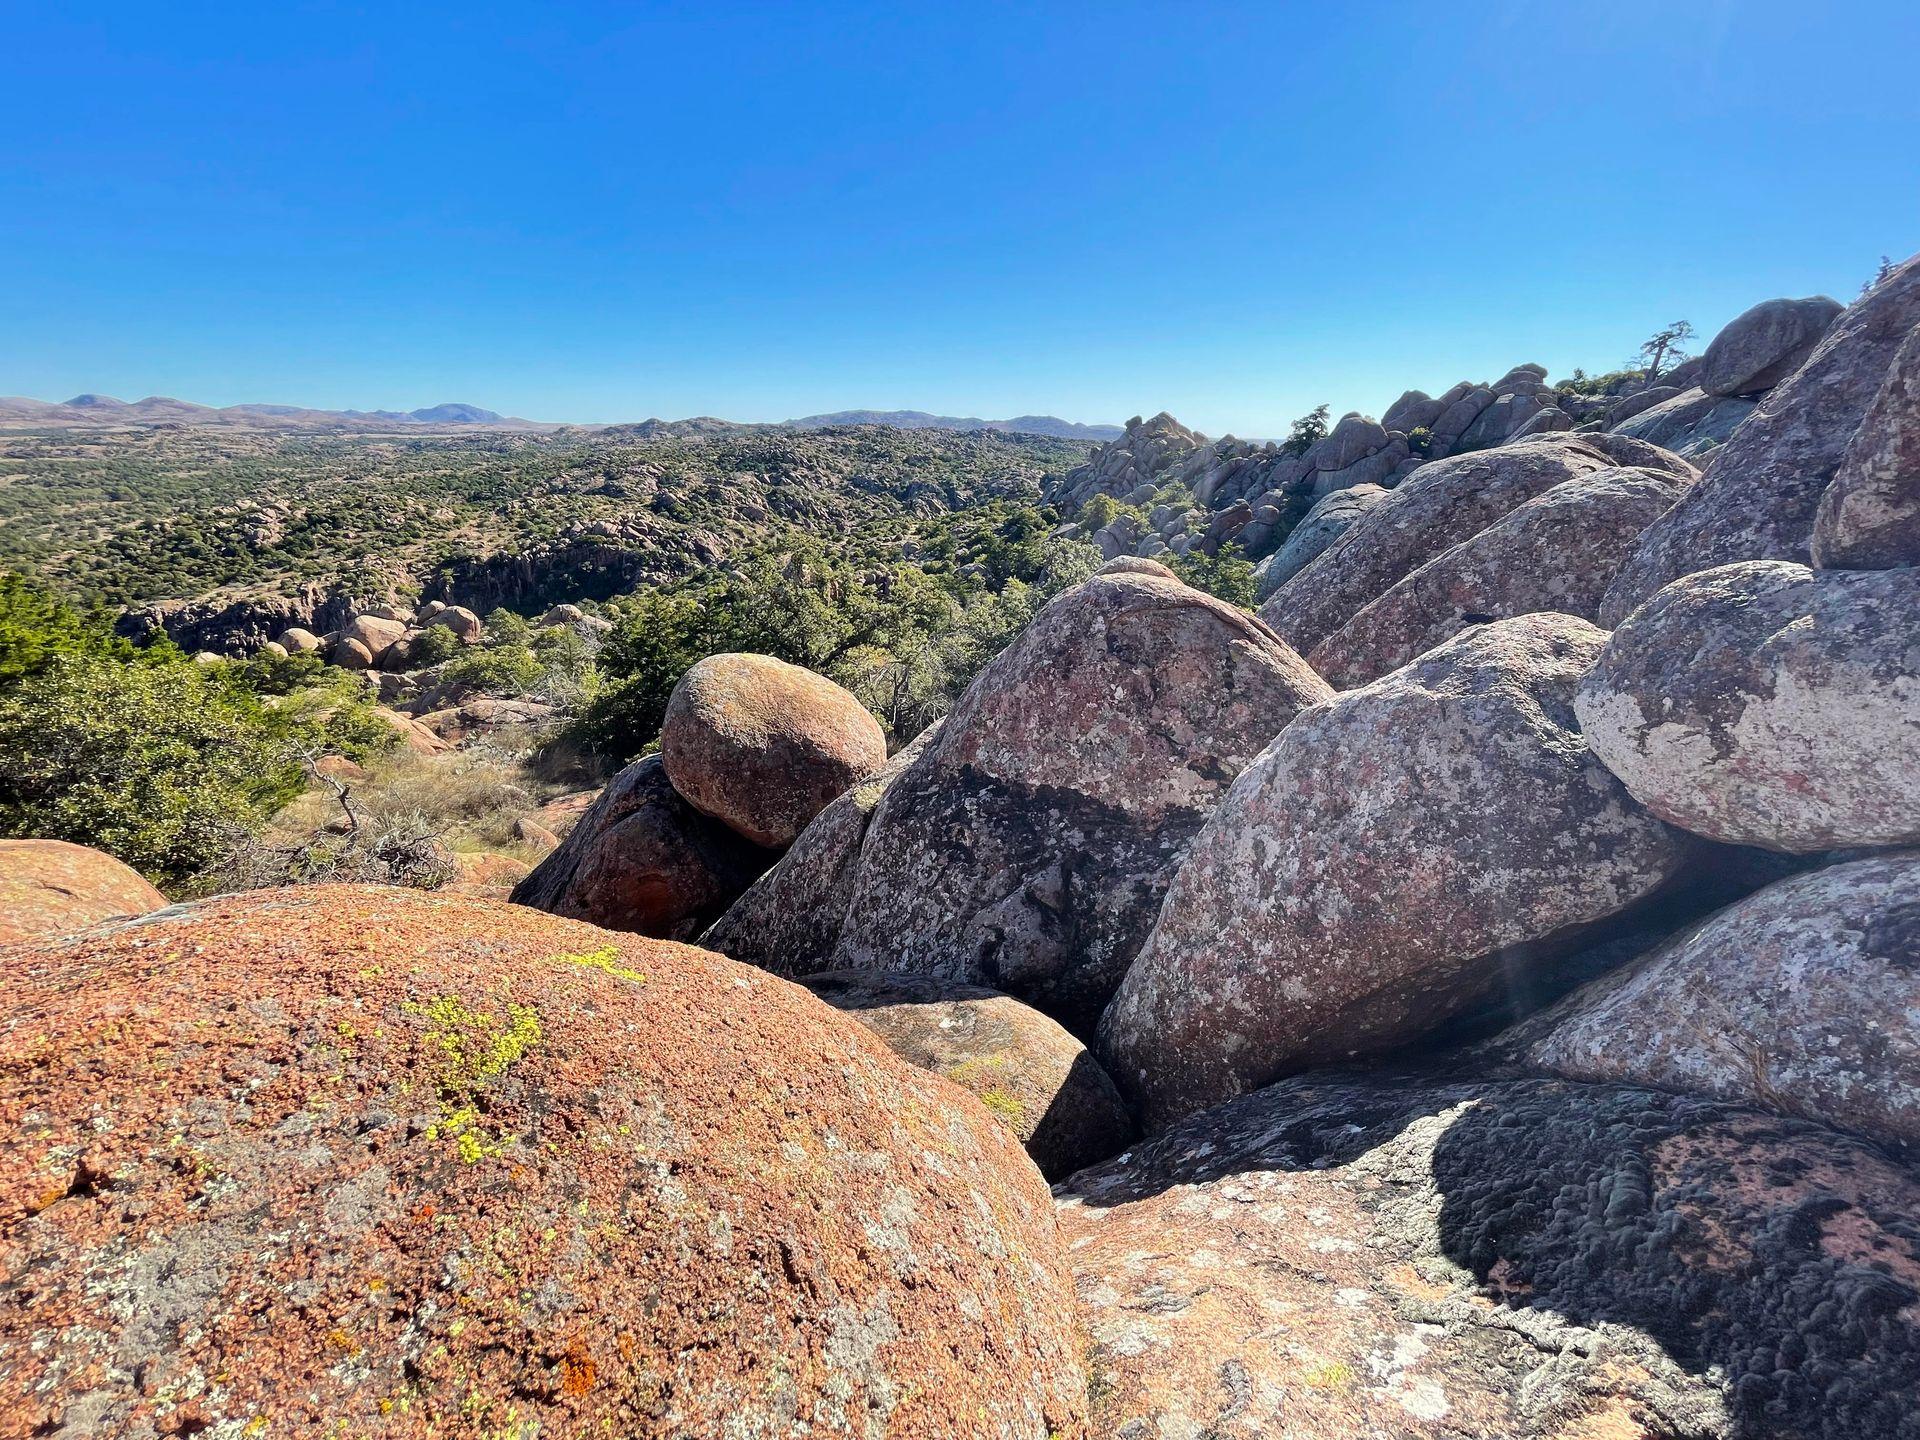 A view of boulders and trees in the distance from Mount Scott in the Wichita Mountains of Oklahoma.